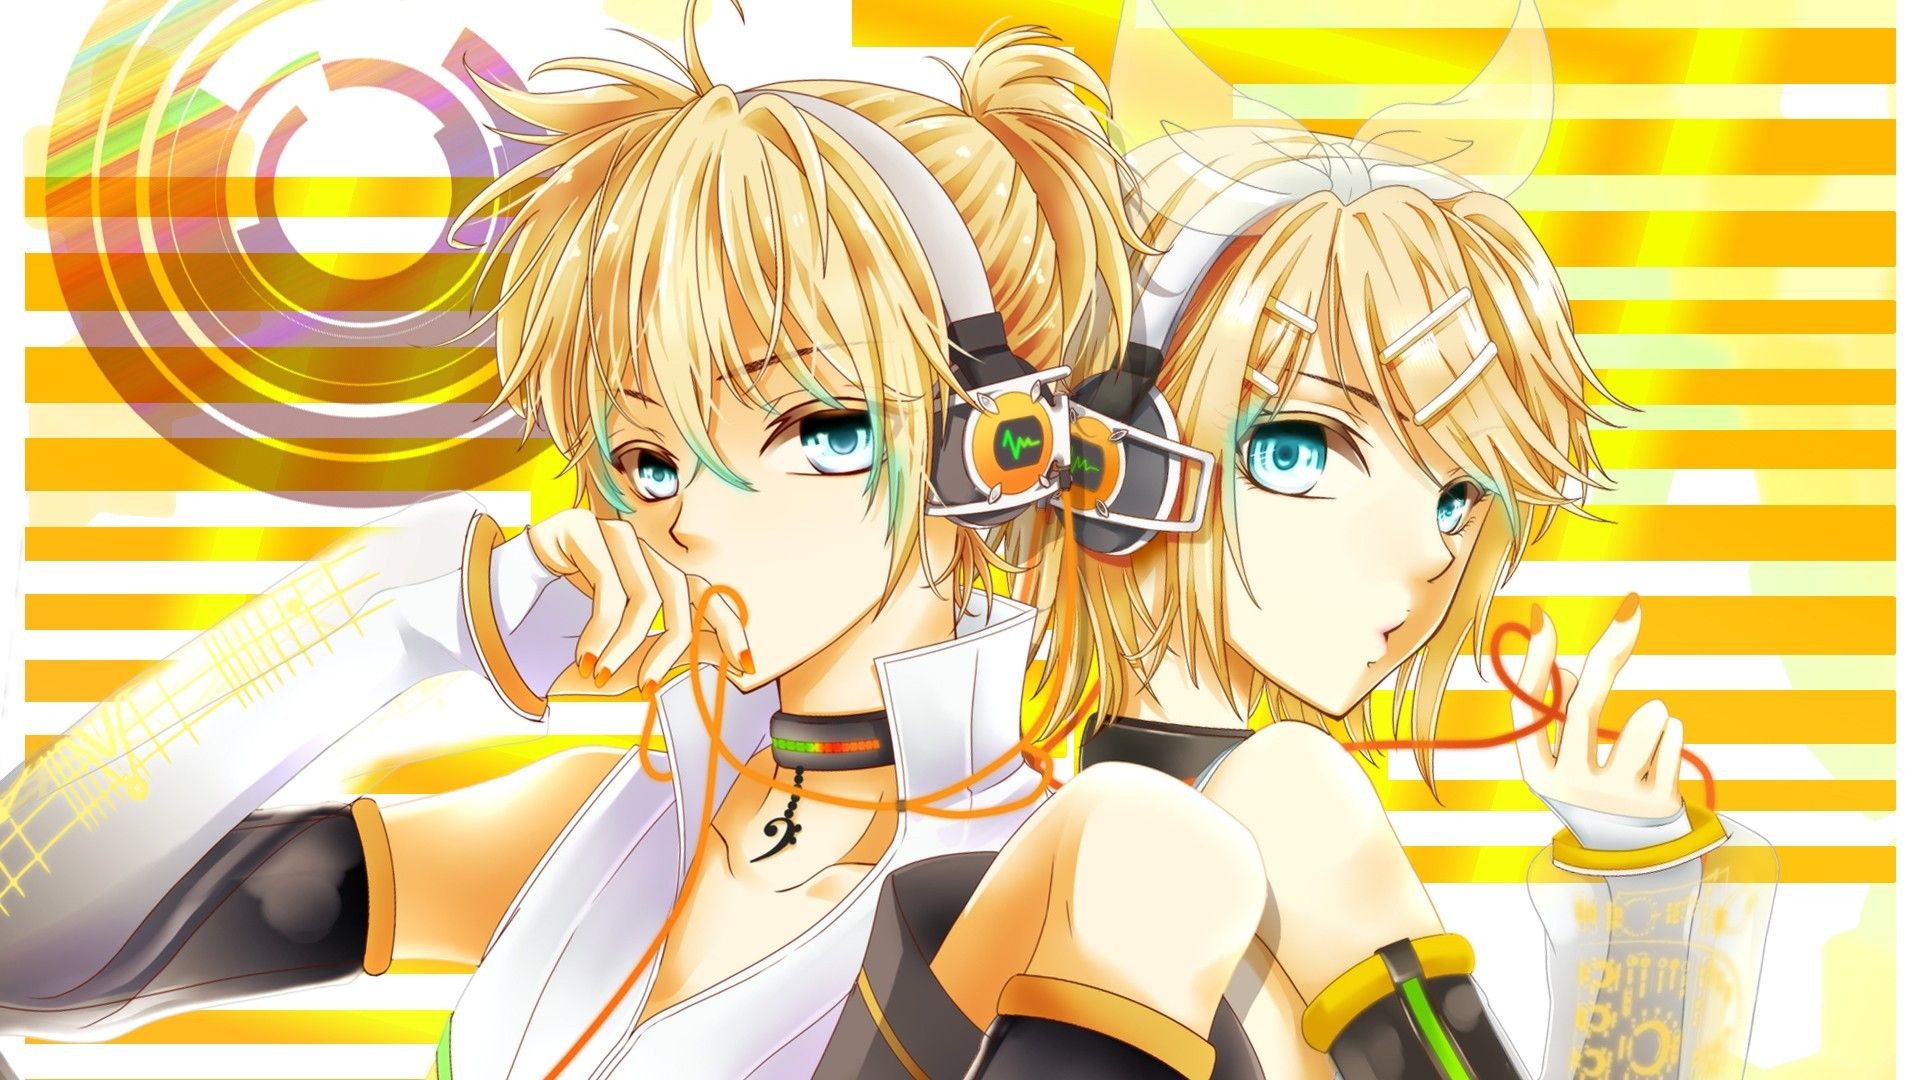 Rin And Len Kagamine Wallpaper Blondes Vocaloid Kagamine Rin Kagamine Len Aqua Eyes Vocaloid Kagamine Rin And Len Vocaloid Vocaloid Len Lens 1920x1080